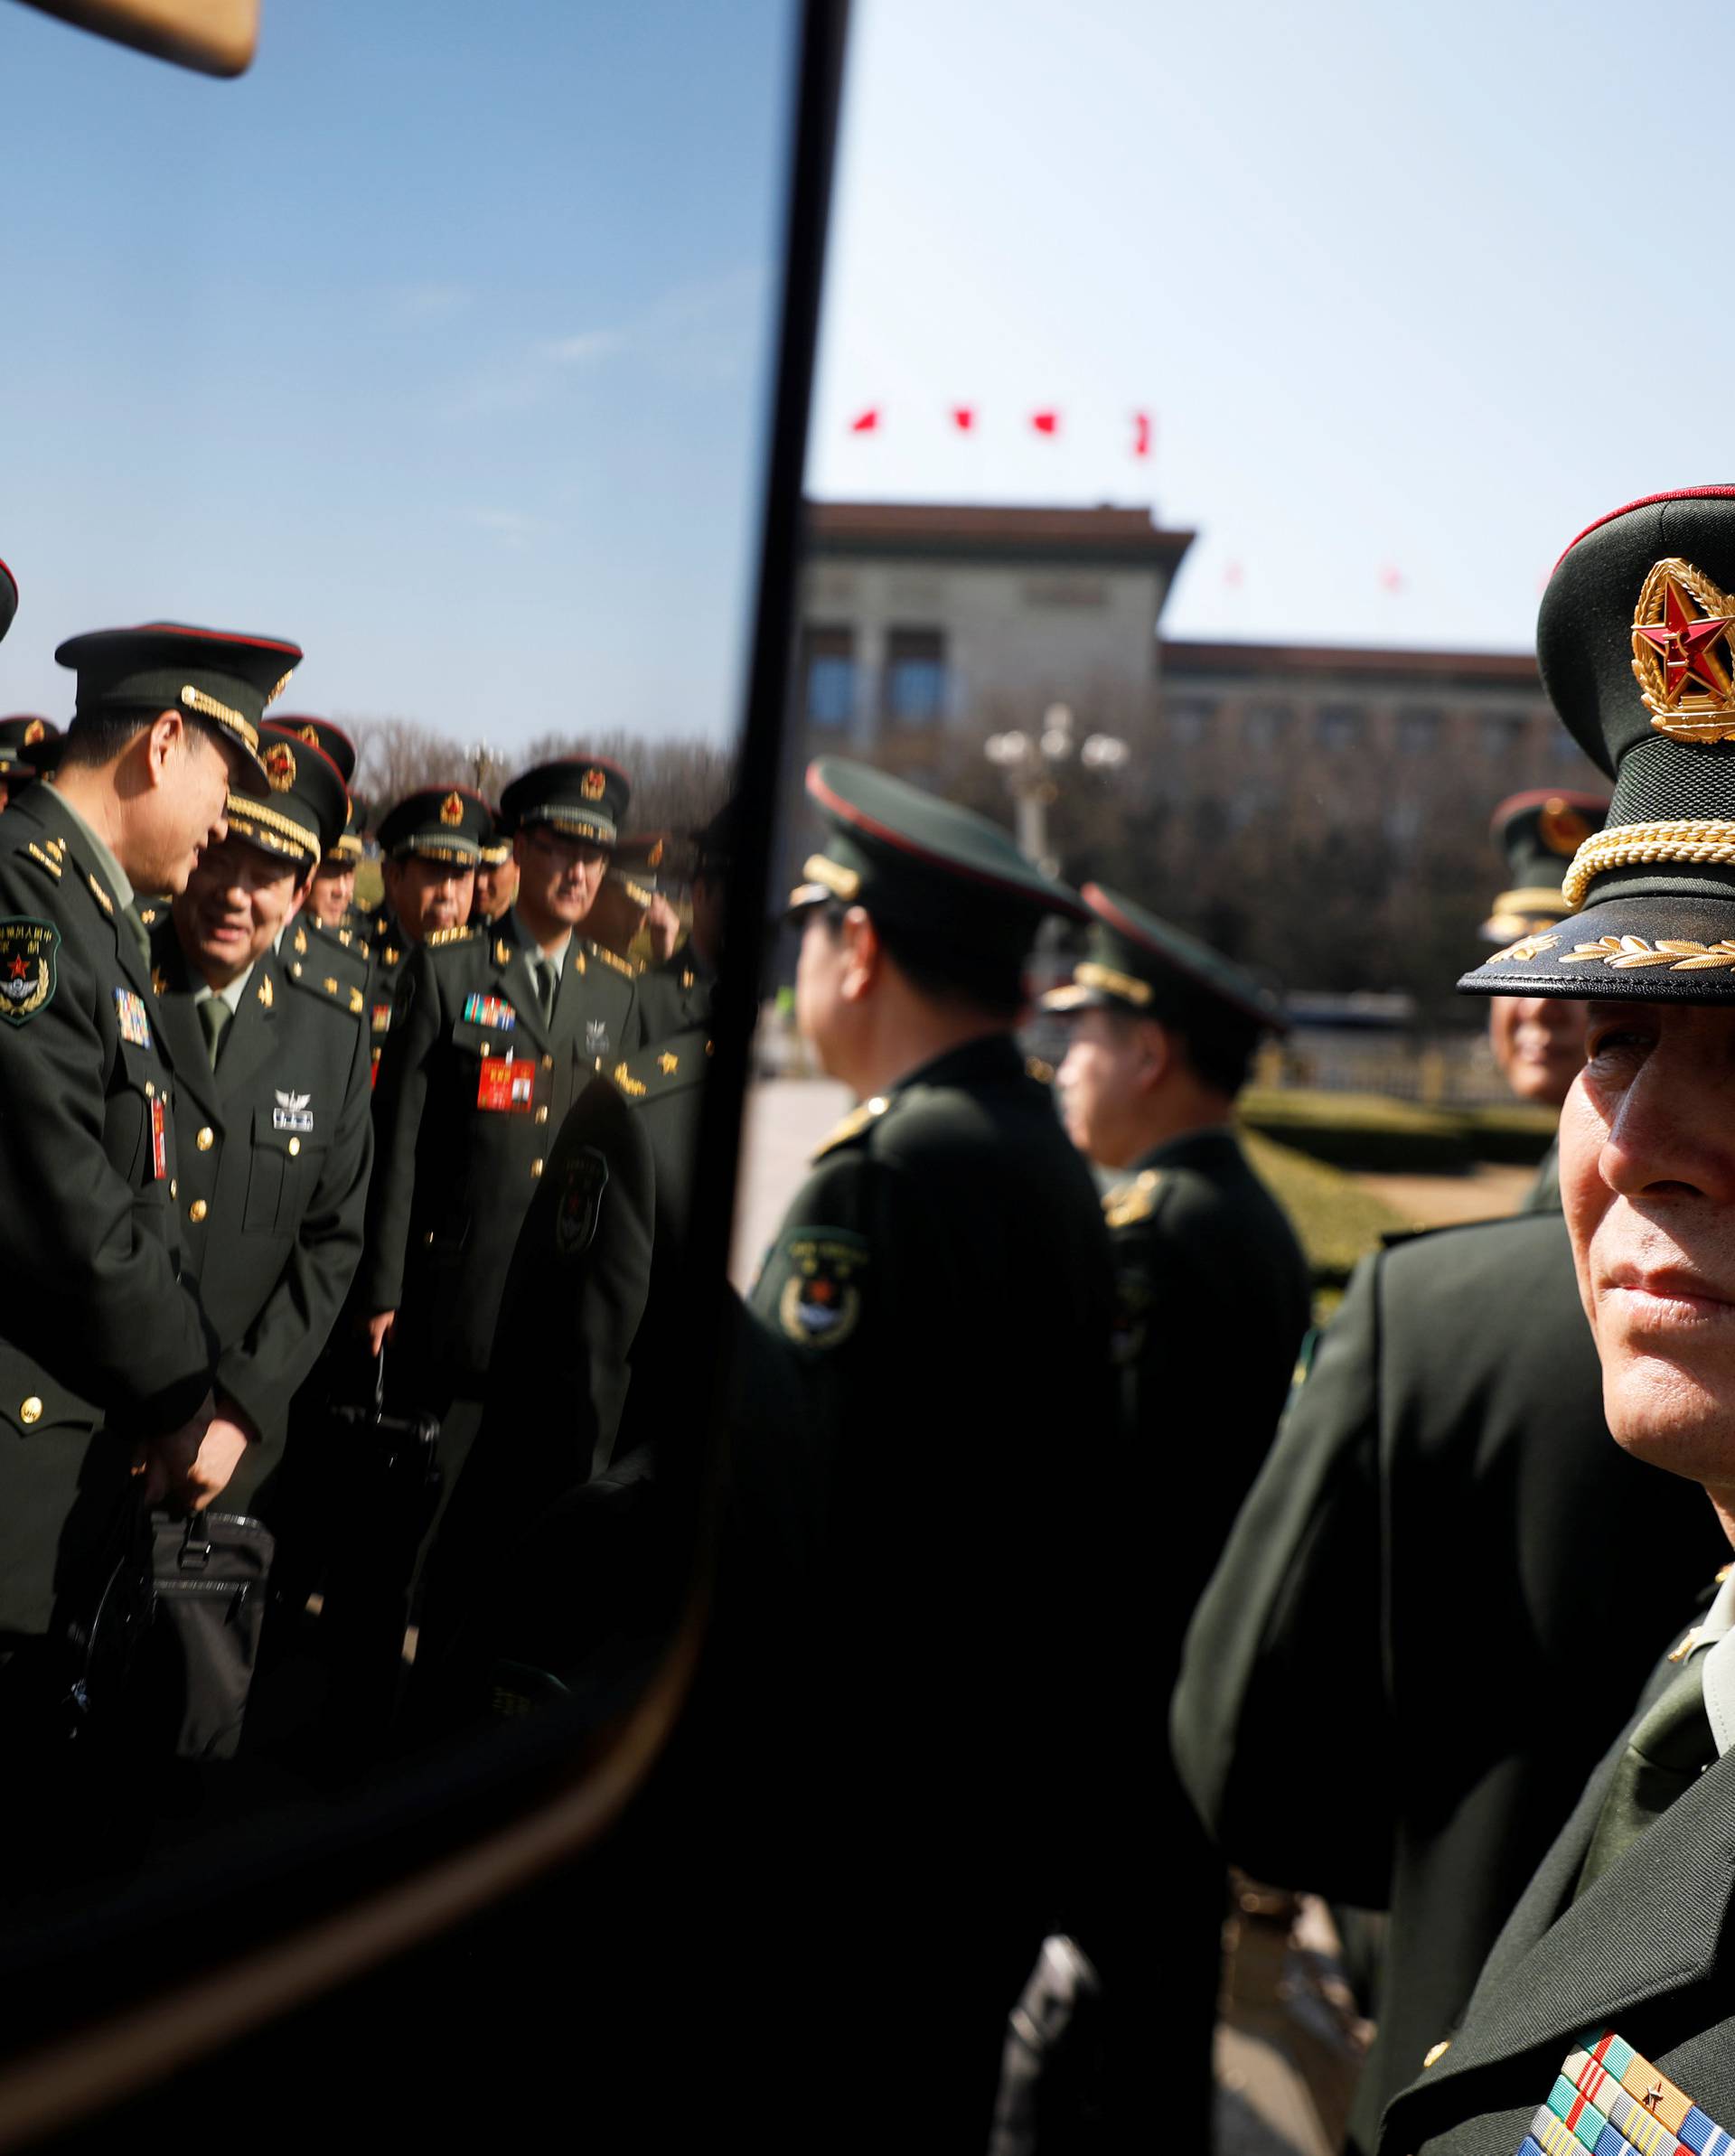 Military delegates arrive for the second plenary session of the National People's Congress (NPC) in Beijing